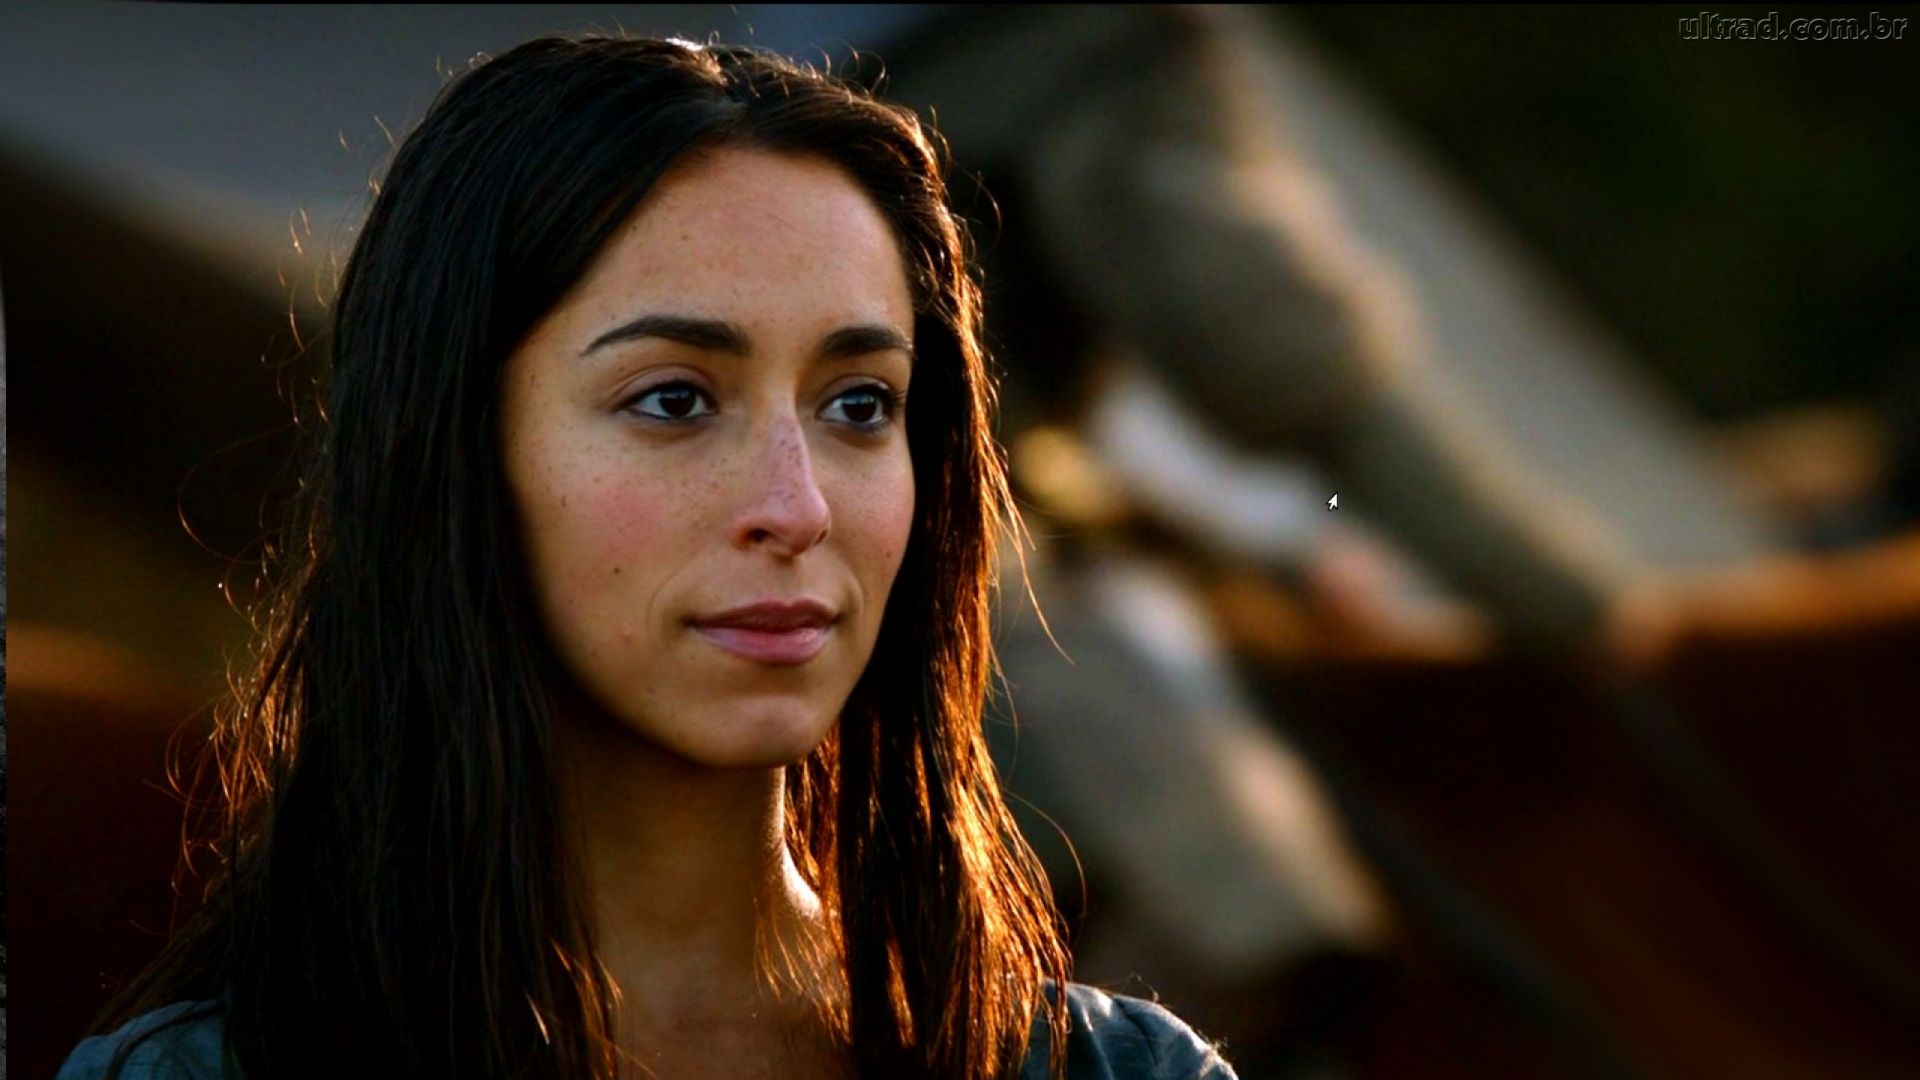 Who plays lady talisa in game of thrones